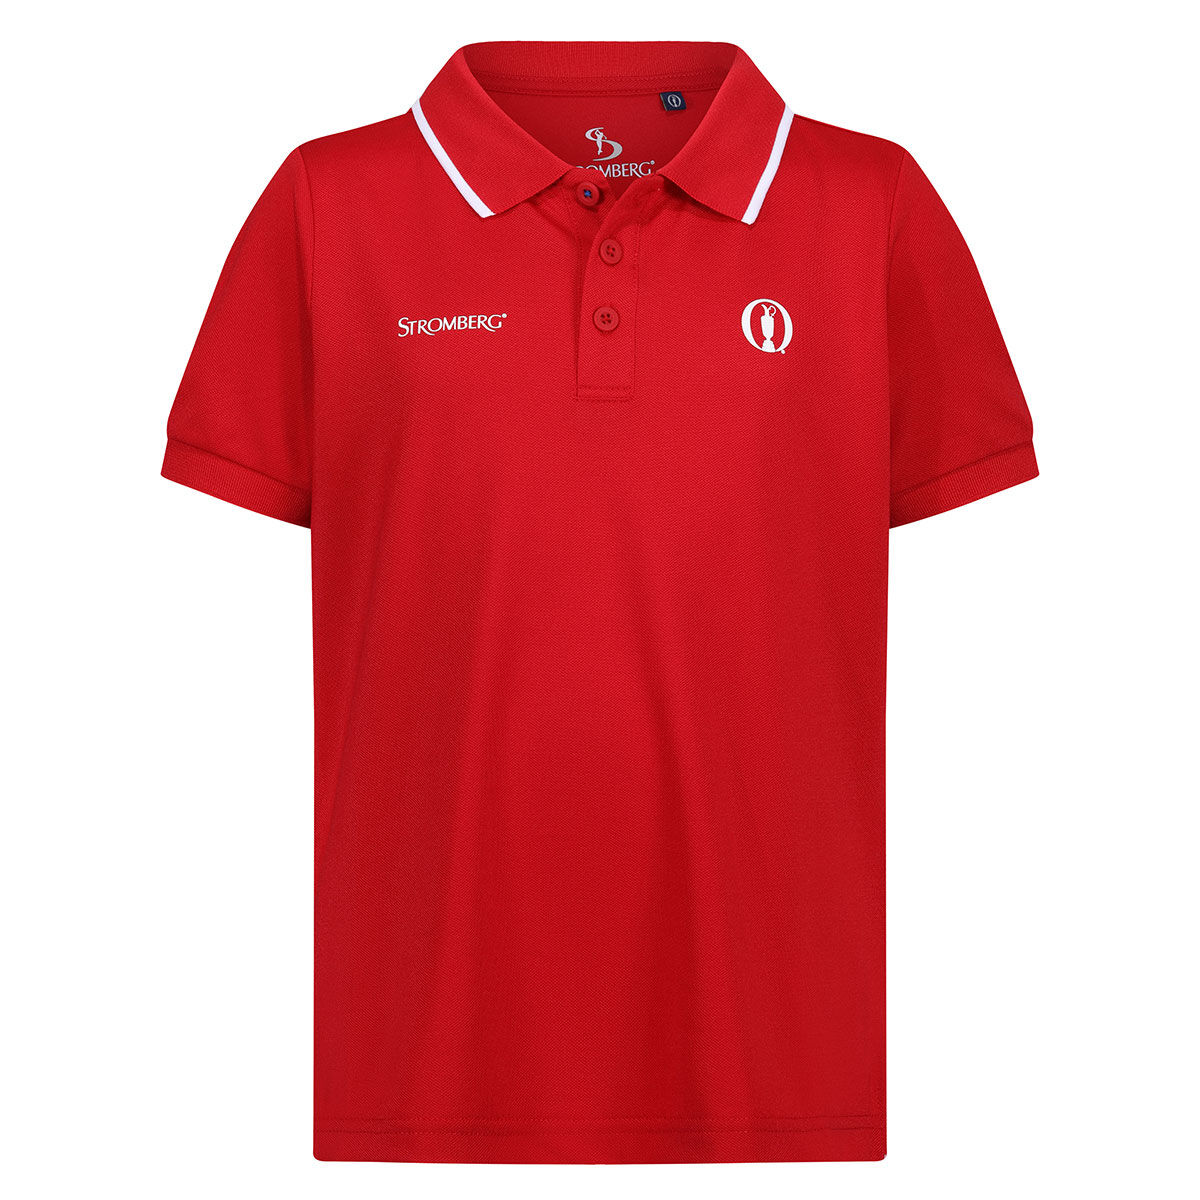 Stromberg Junior The Open Harbour Stretch Golf Polo Shirt, Unisex, Tango red, 12-13 years | American Golf